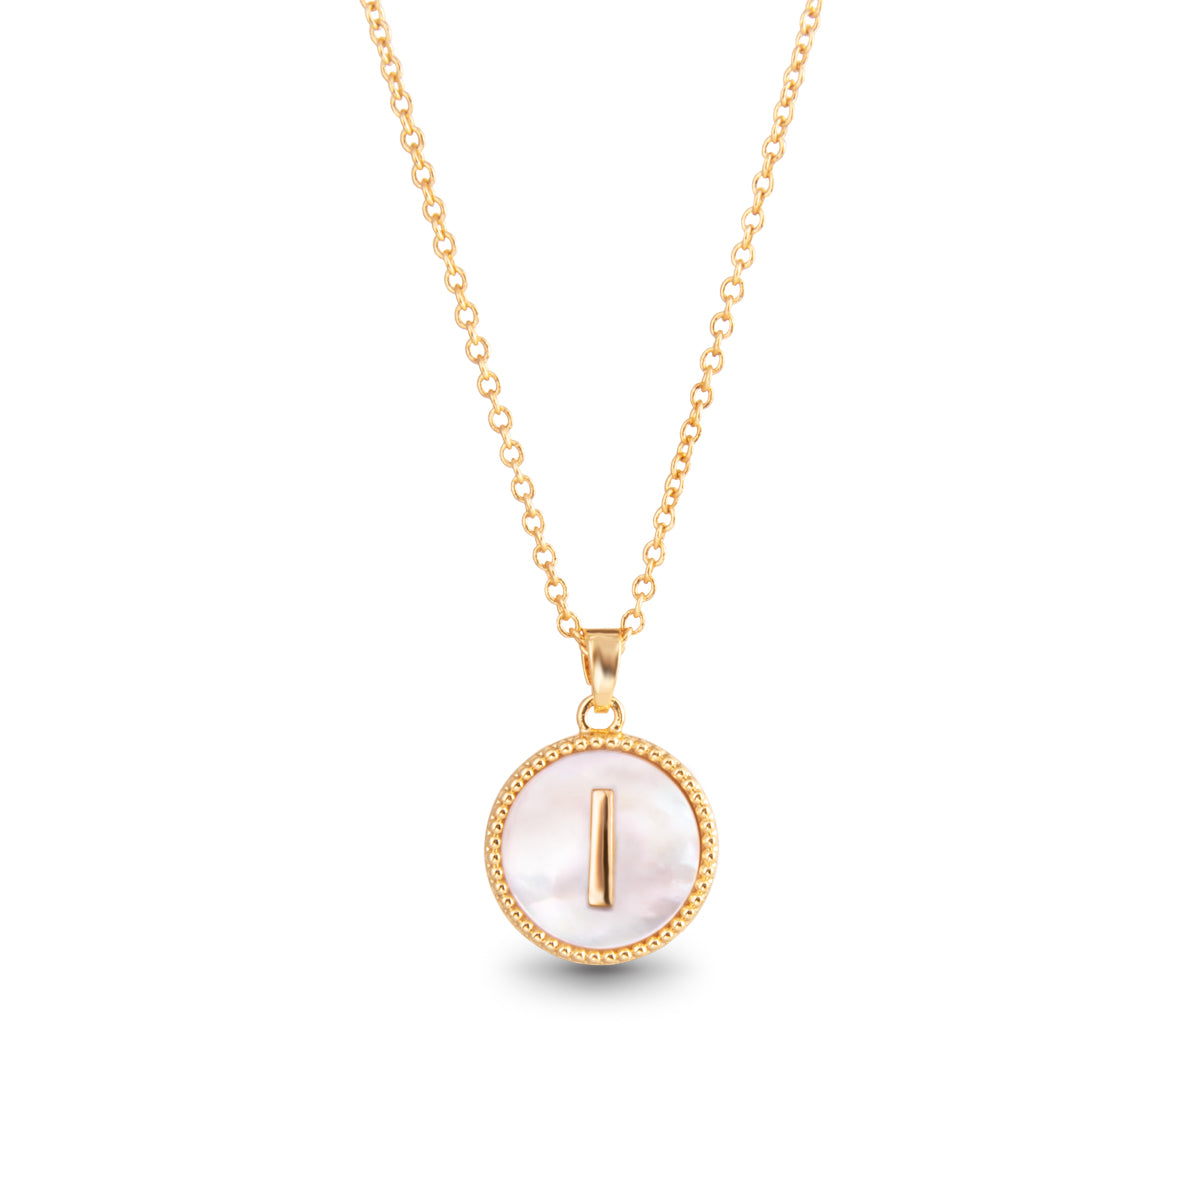 Gold Mother of Pearl Initial Necklace - I